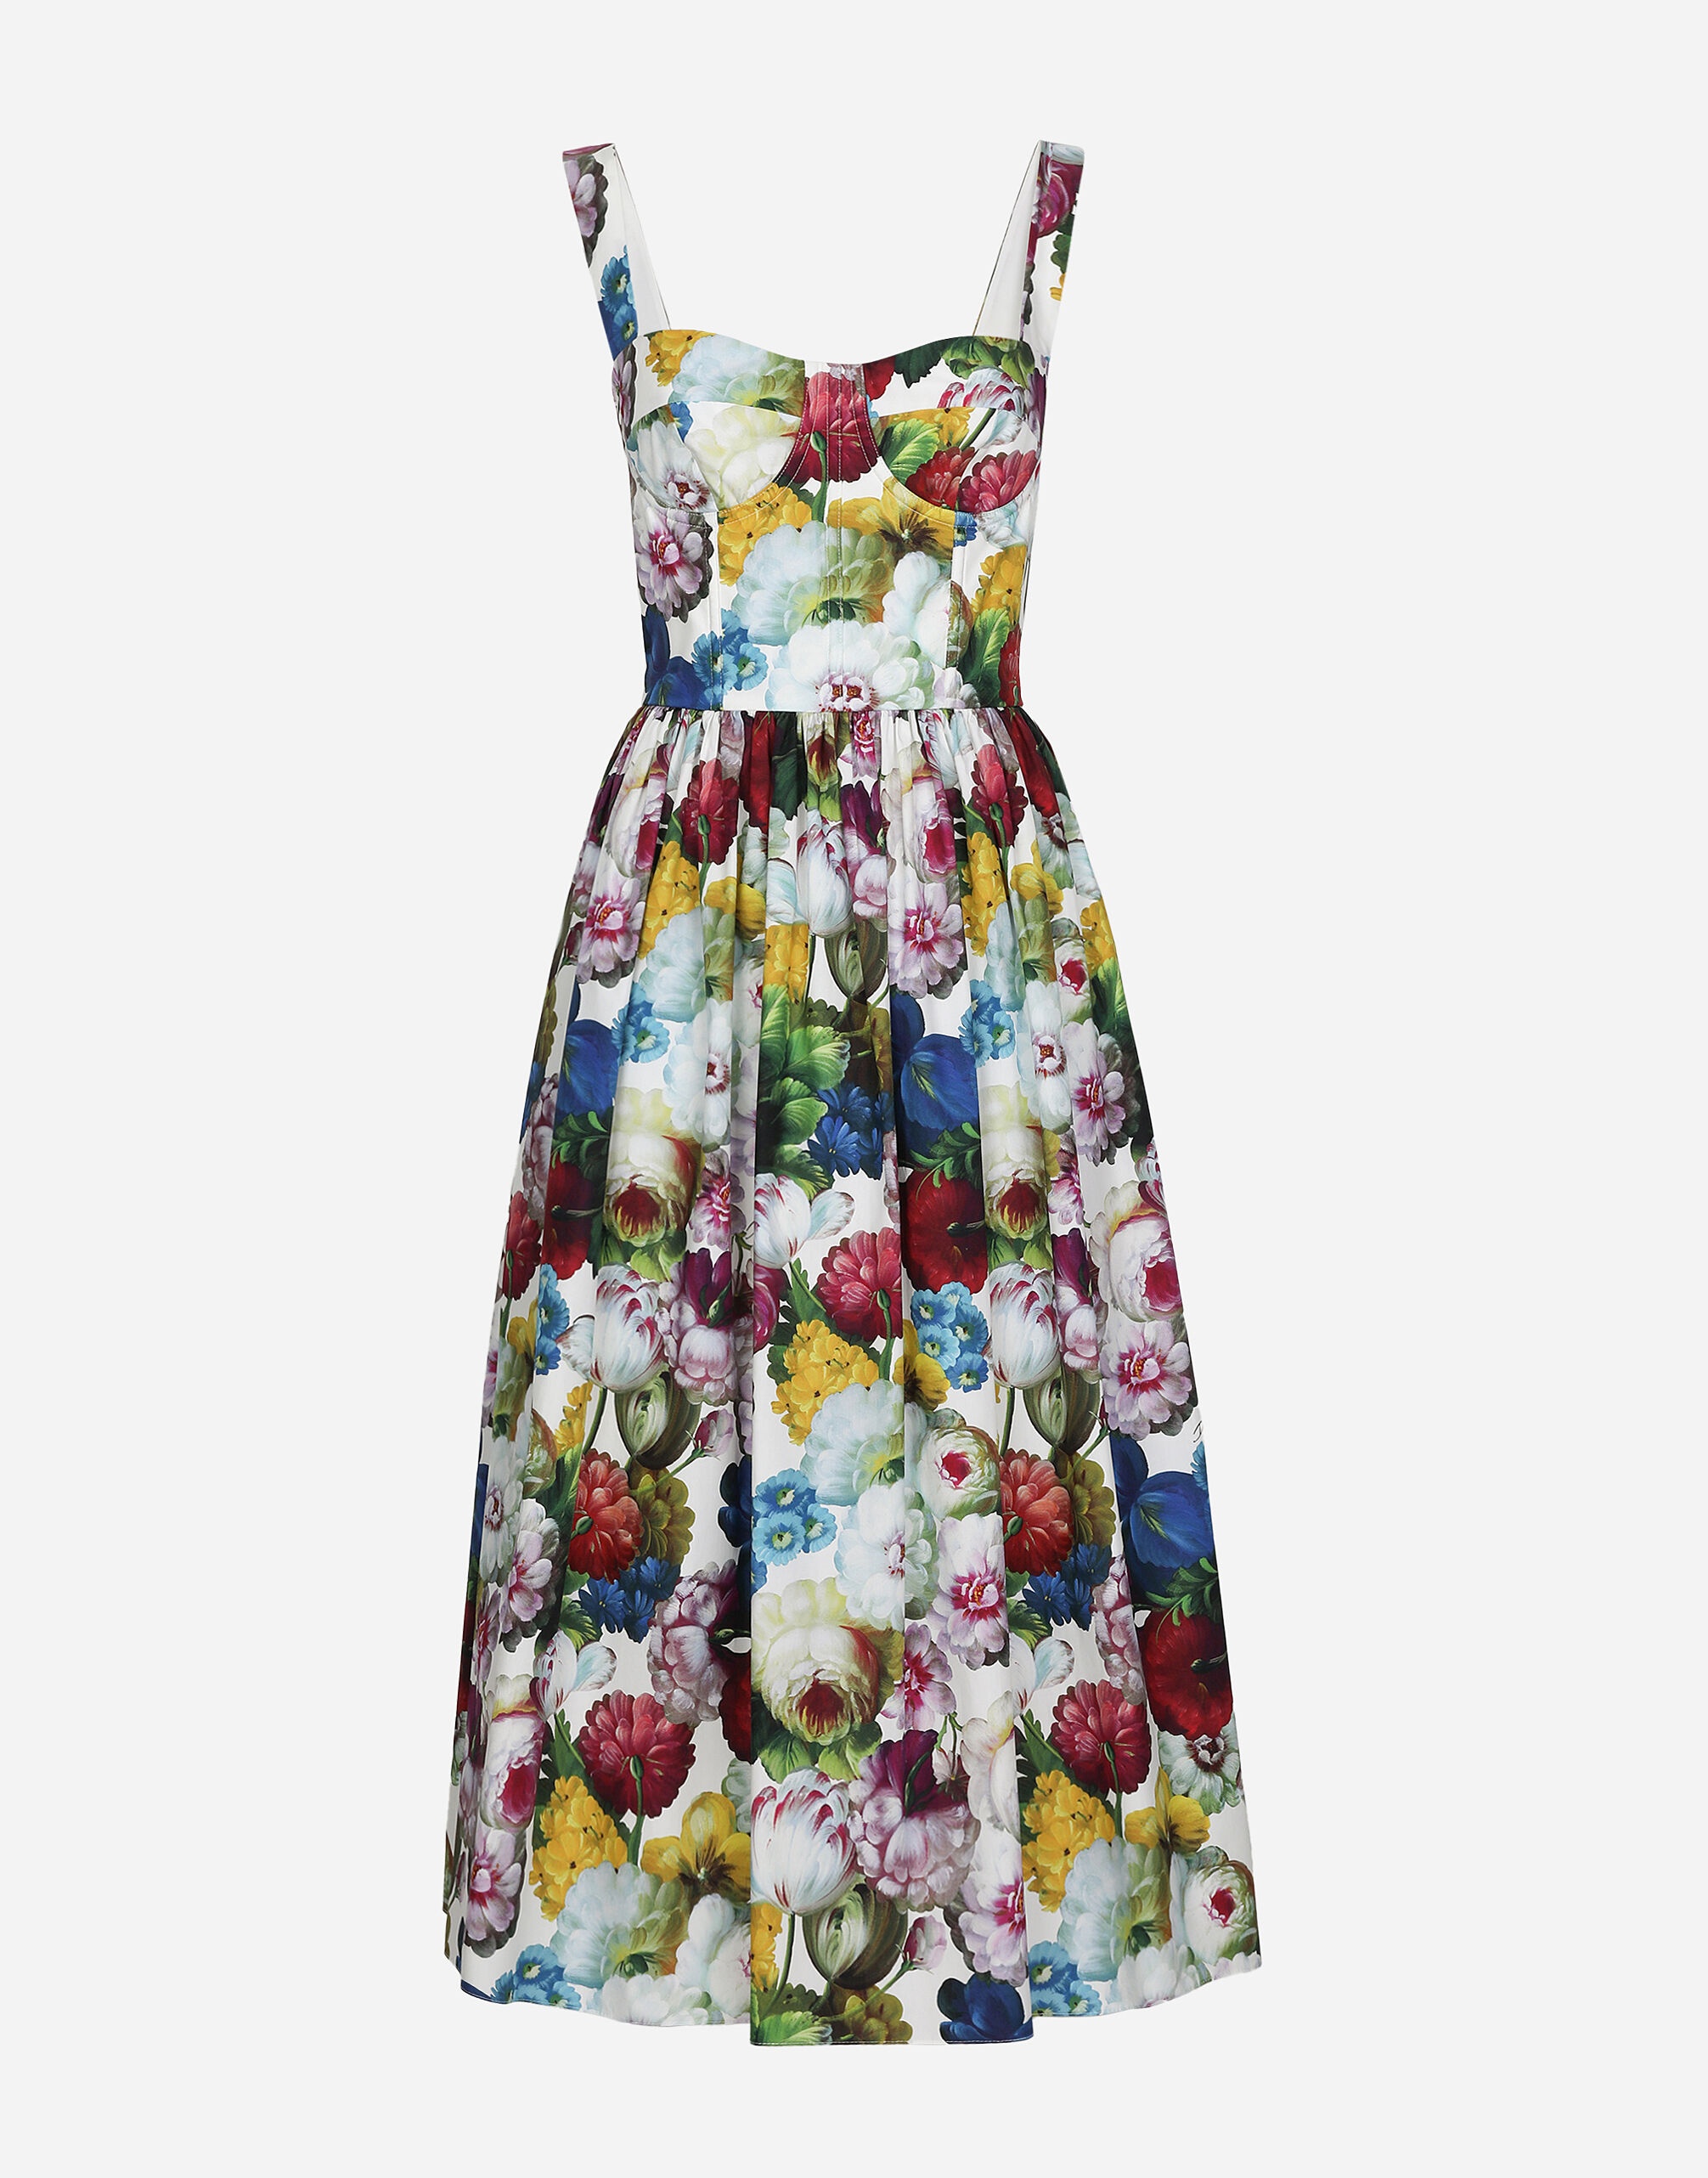 Corset dress with nocturnal flower print - 1